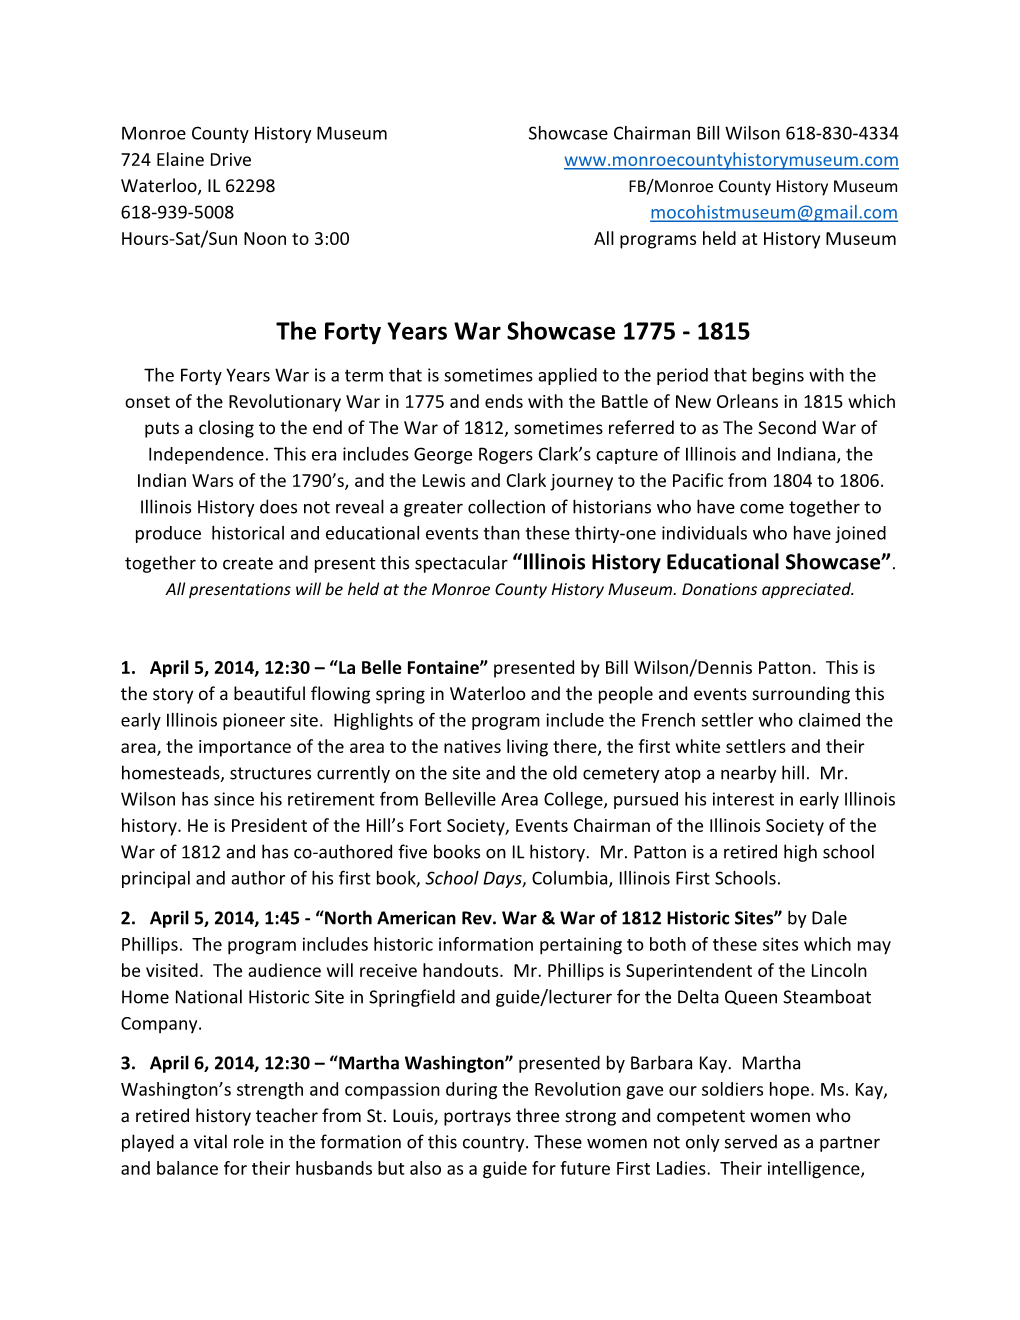 The Forty Years War Showcase 1775 - 1815